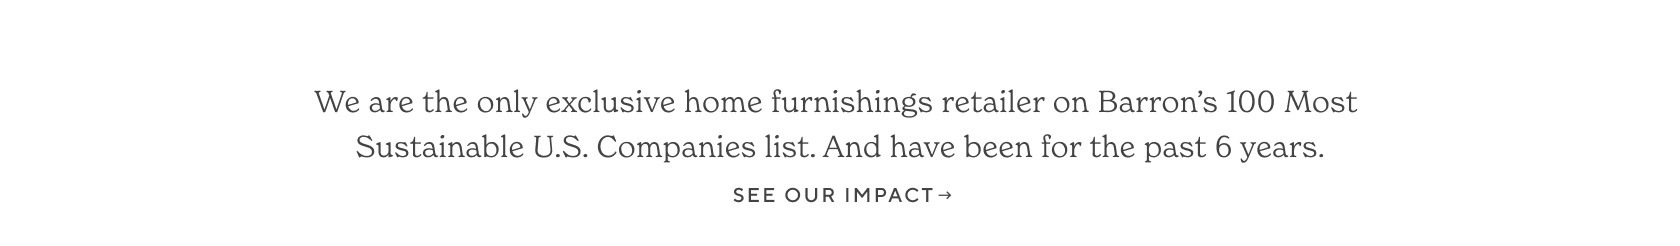 We are the only exclusive home furnishings retailer on Barron's 100 Most Sustainable U.S. Companies list. And have been for the past 6 years. See Our Impact